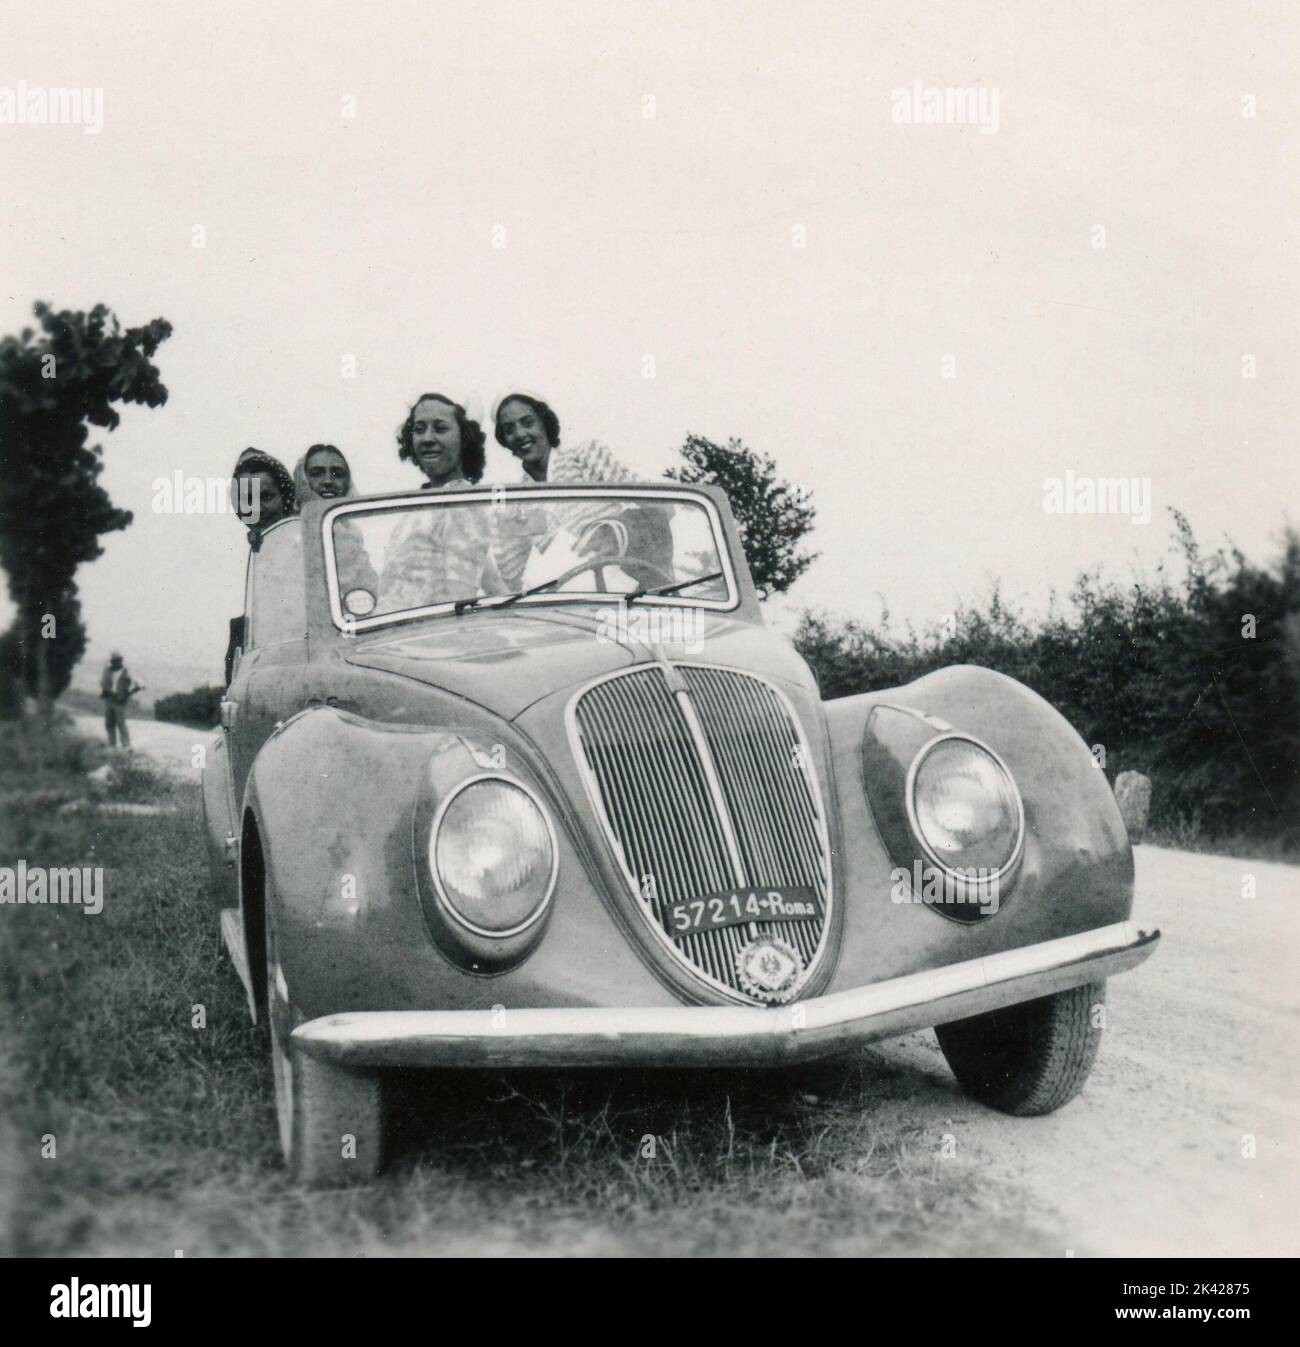 Four women on an old FIAT 1500 Cabriolet car, 1940s Stock Photo